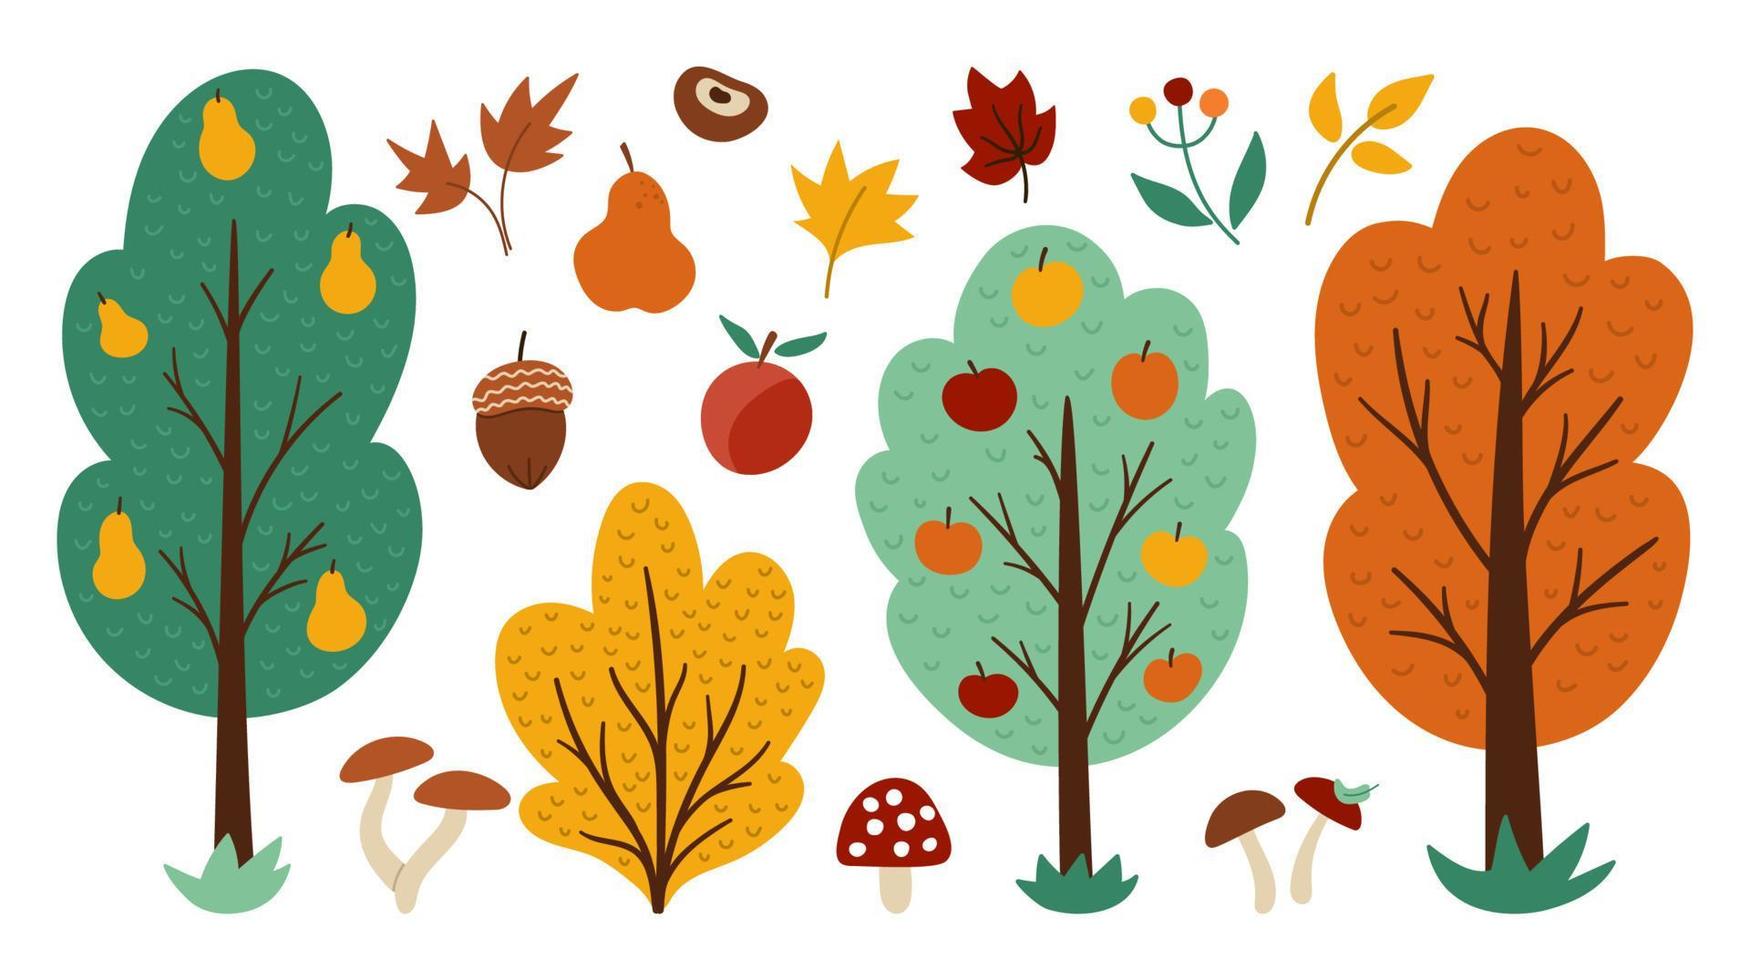 Vector set of autumn forest or garden fruit trees, plants, shrubs, bushes, mushrooms isolated on white background. Fall apple and pear garden illustration. Natural greenery icons collection